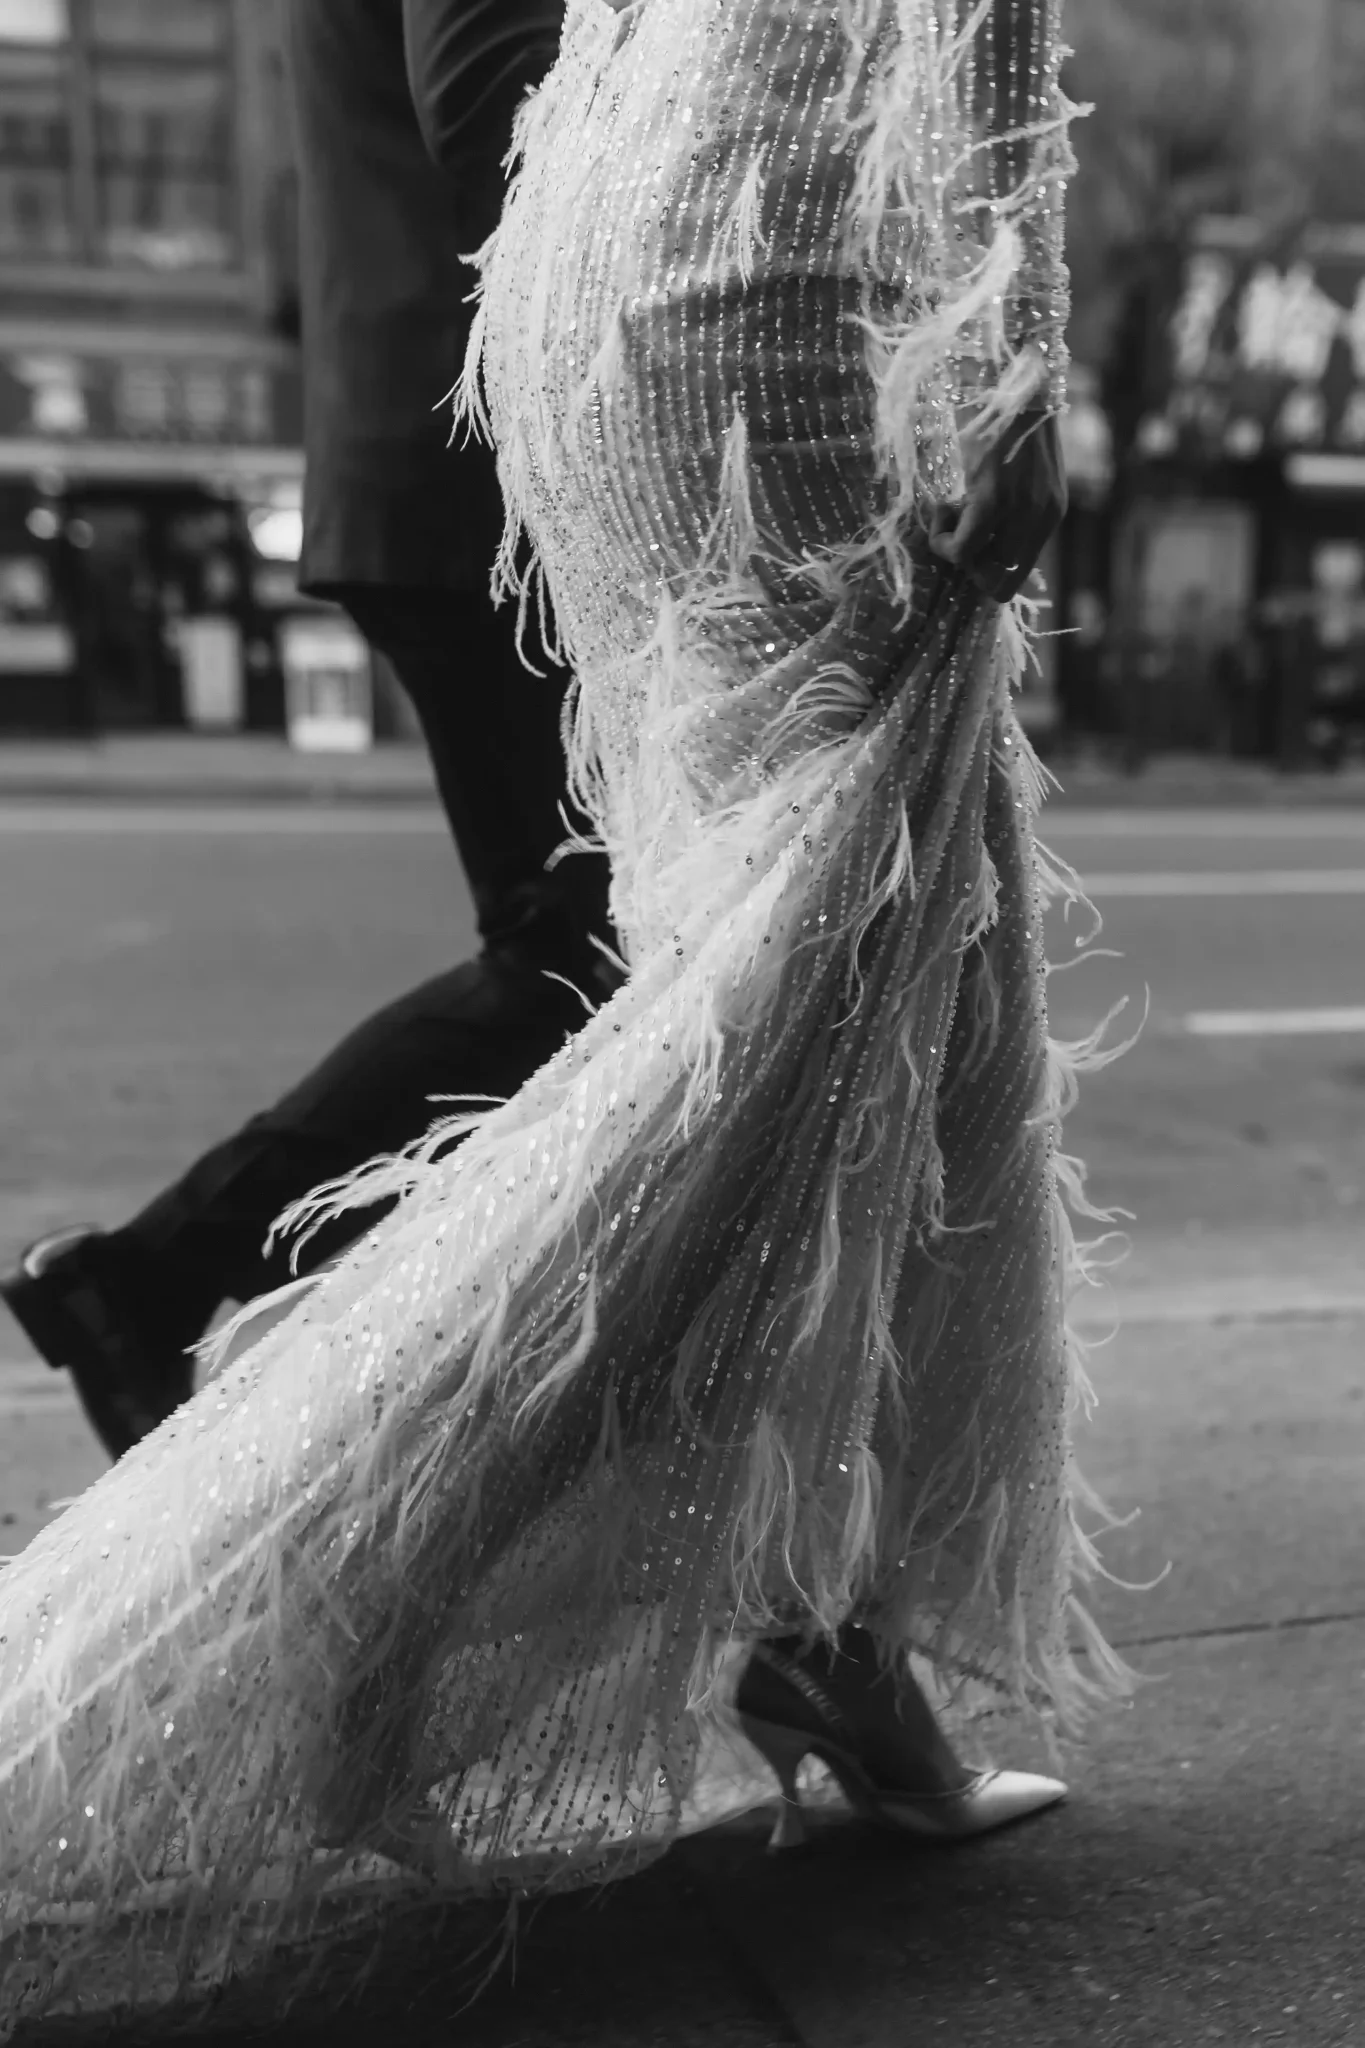 A black and white photo of a bride and groom walking down the street.